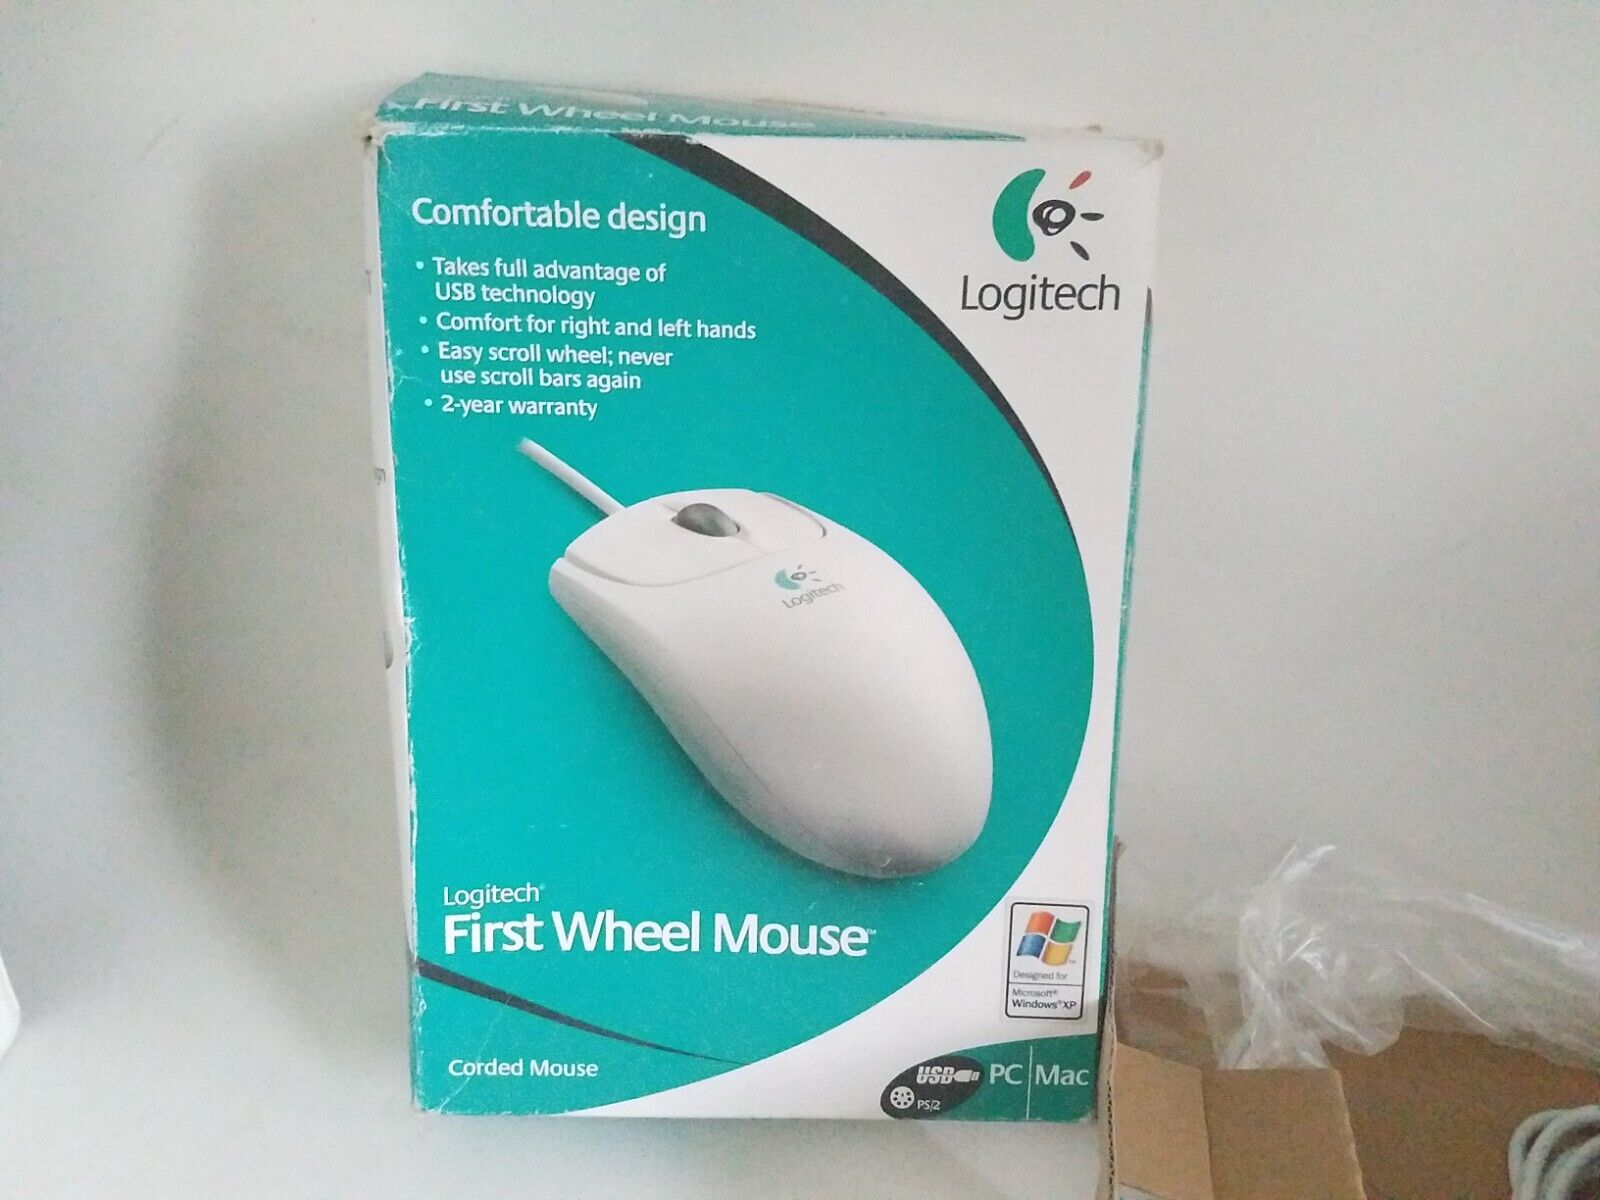 Logitech First Wheel Mouse Appears Unused